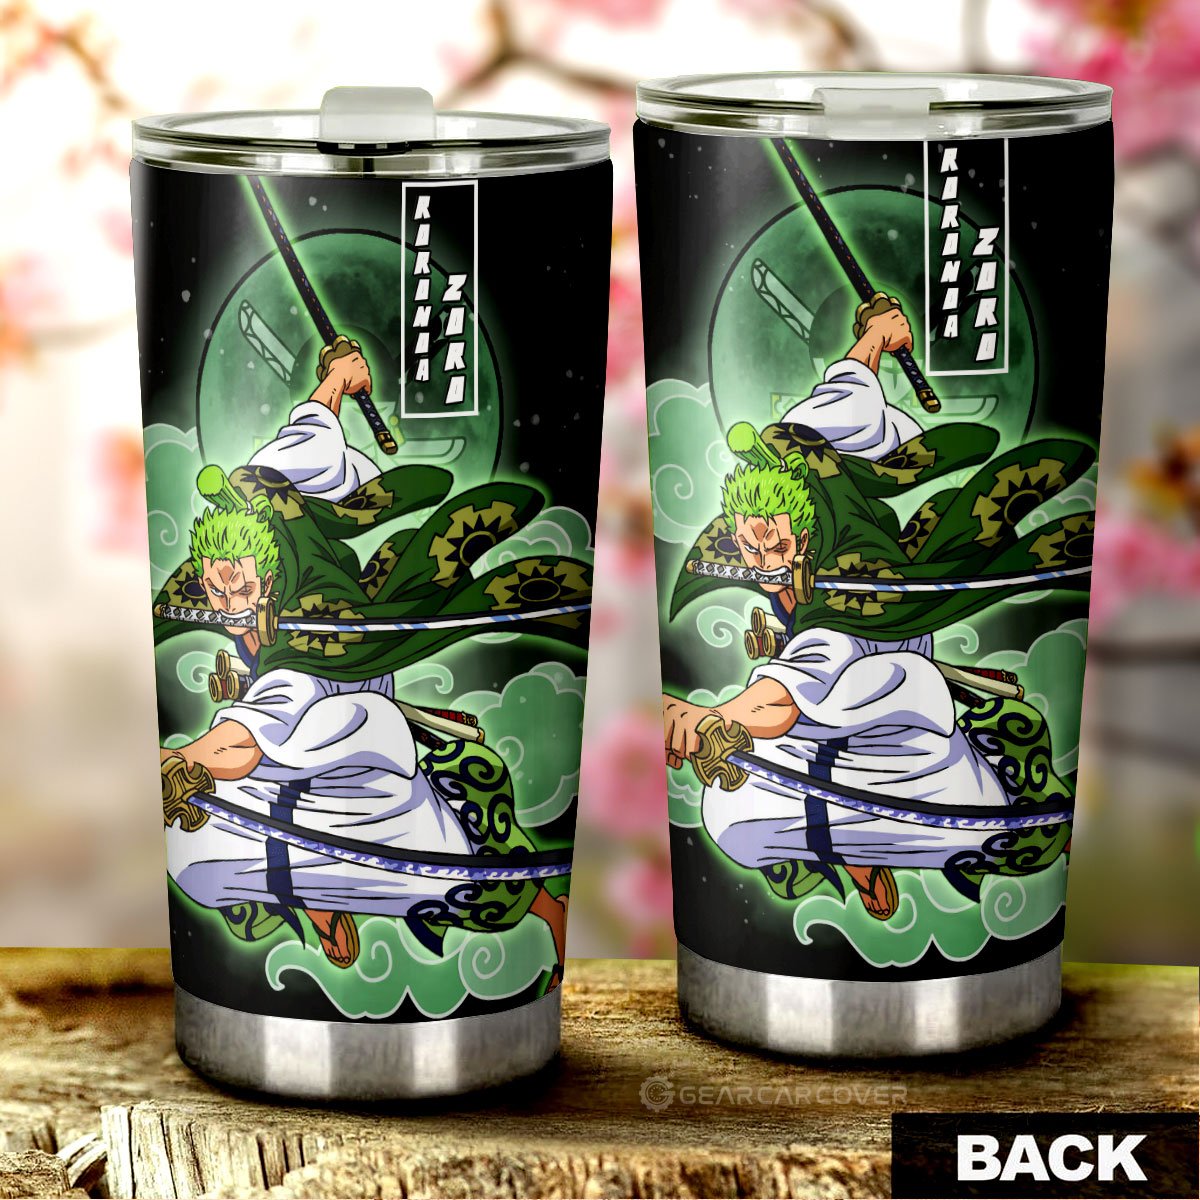 Zoro Wano Tumbler Cup Custom Anime One Piece Car Accessories For Anime Fans - Gearcarcover - 3